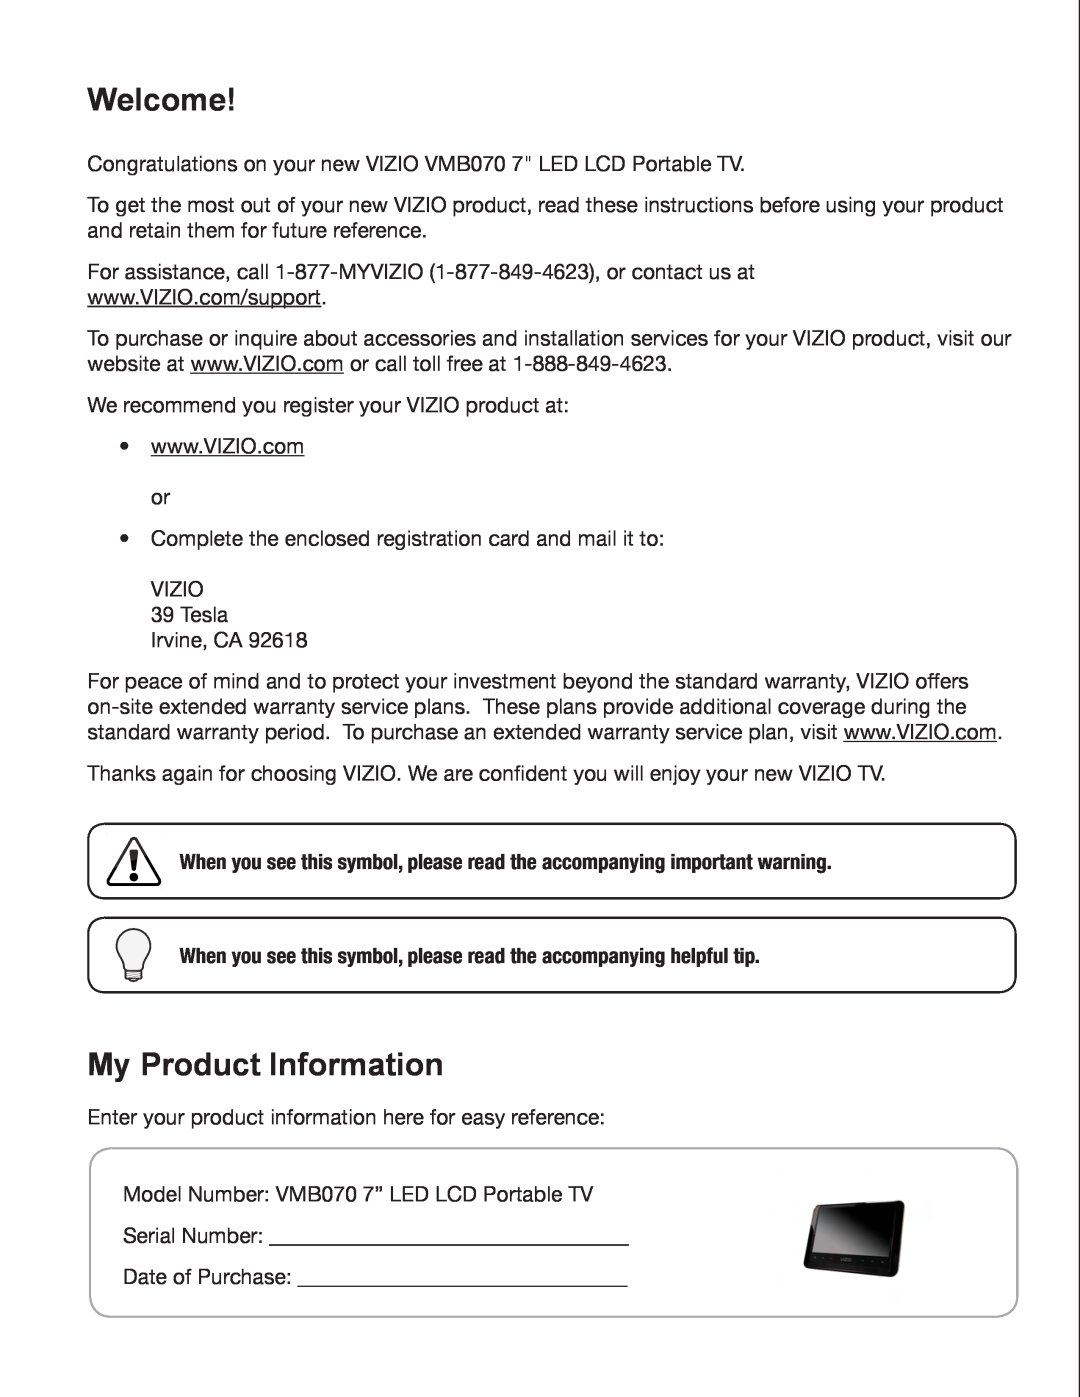 Zanussi VMB070 manual Welcome, My Product Information 